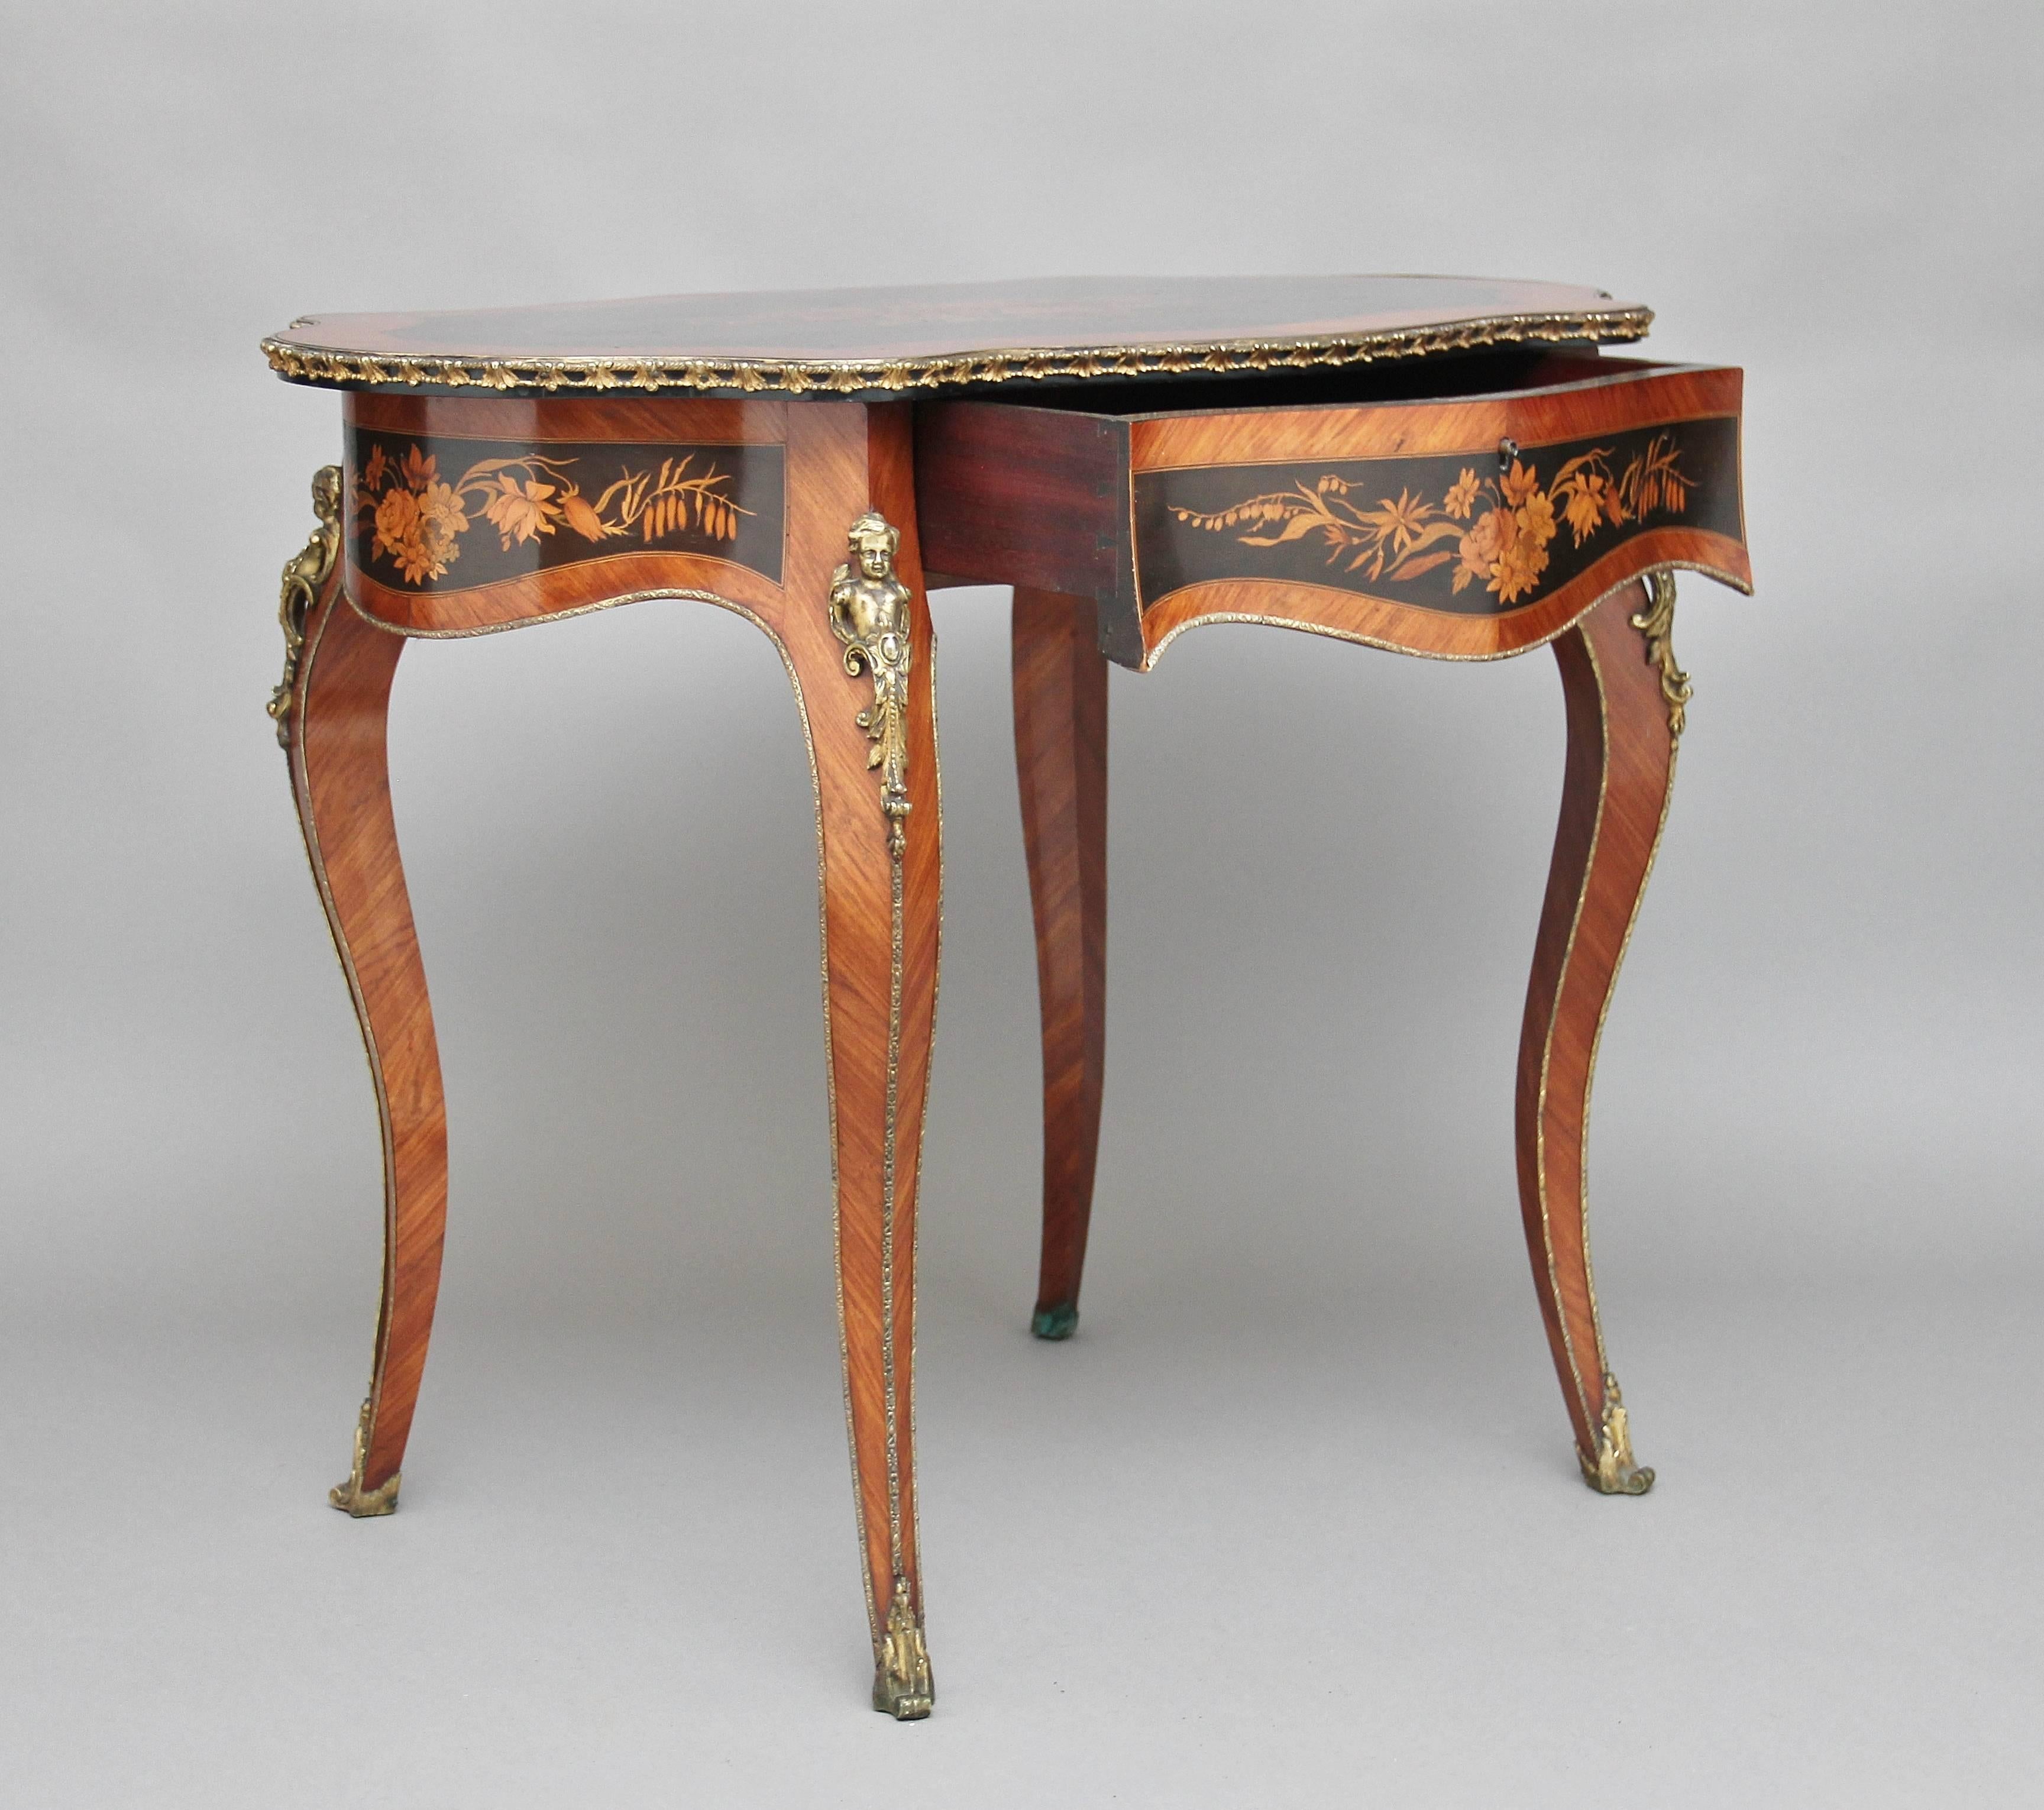 19th century French kingwood freestanding inlaid and ormolu mounted center or side table, the shaped top with ormolu decoration running along the edge, the center of the top inlaid with floral marquetry on an ebonized background, with a shaped